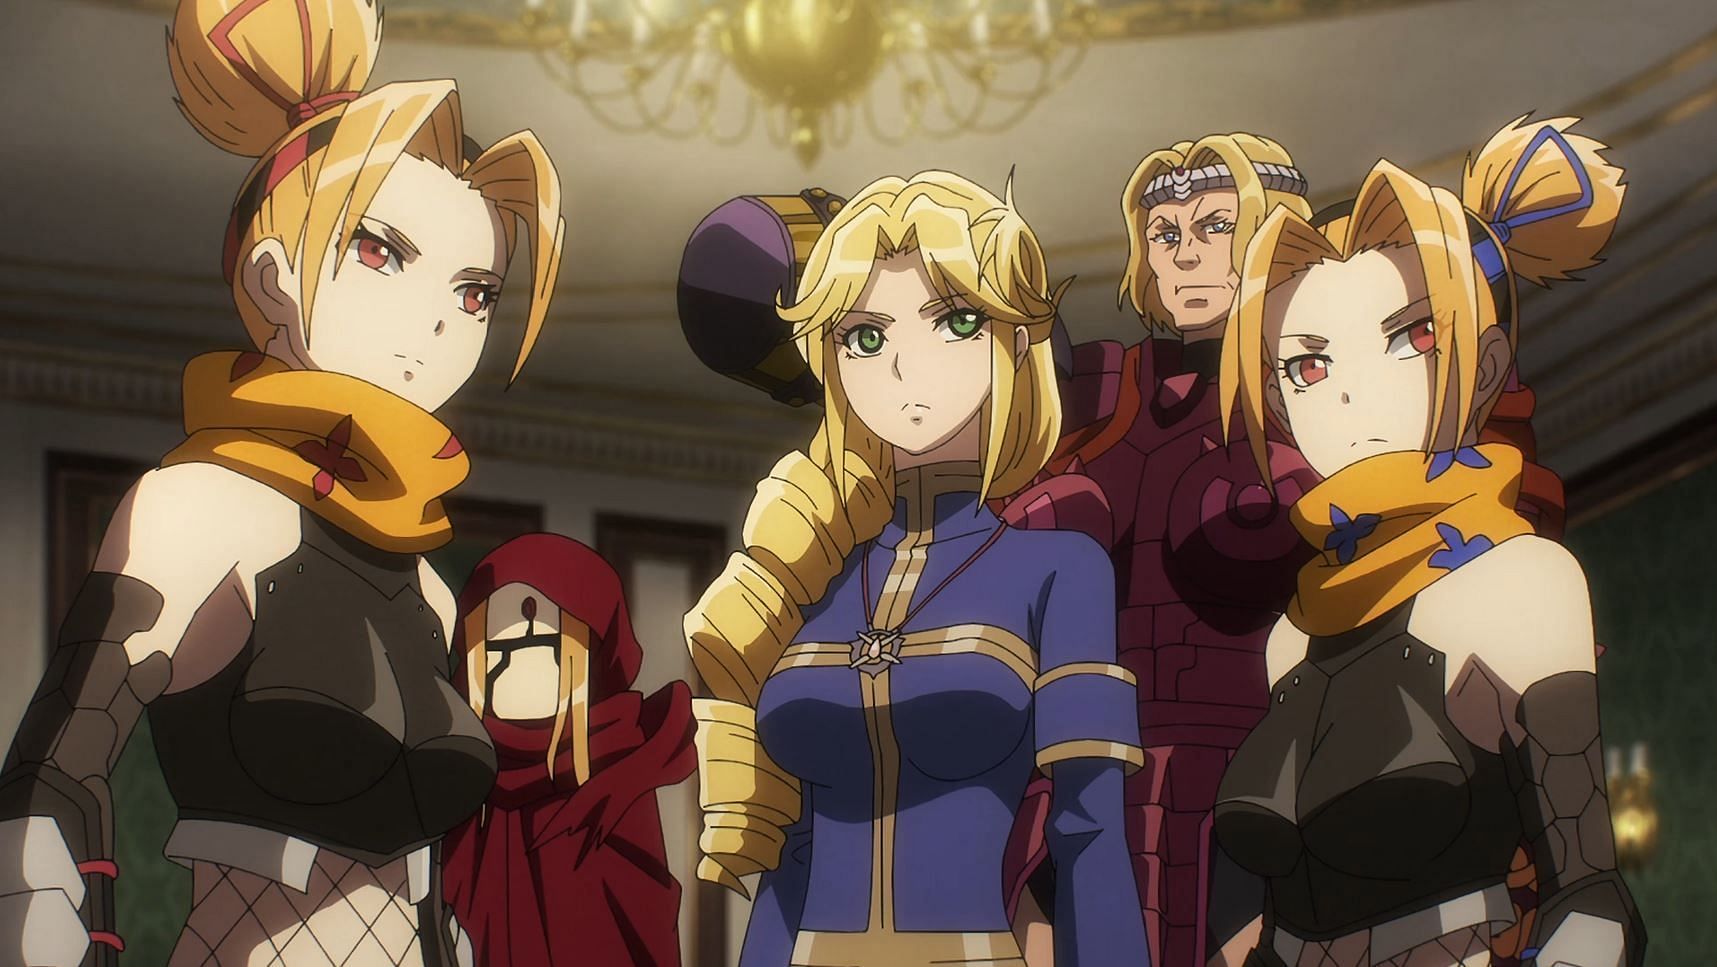 Blue Rose adventure group from Overlord IV (Image via Madhouse)